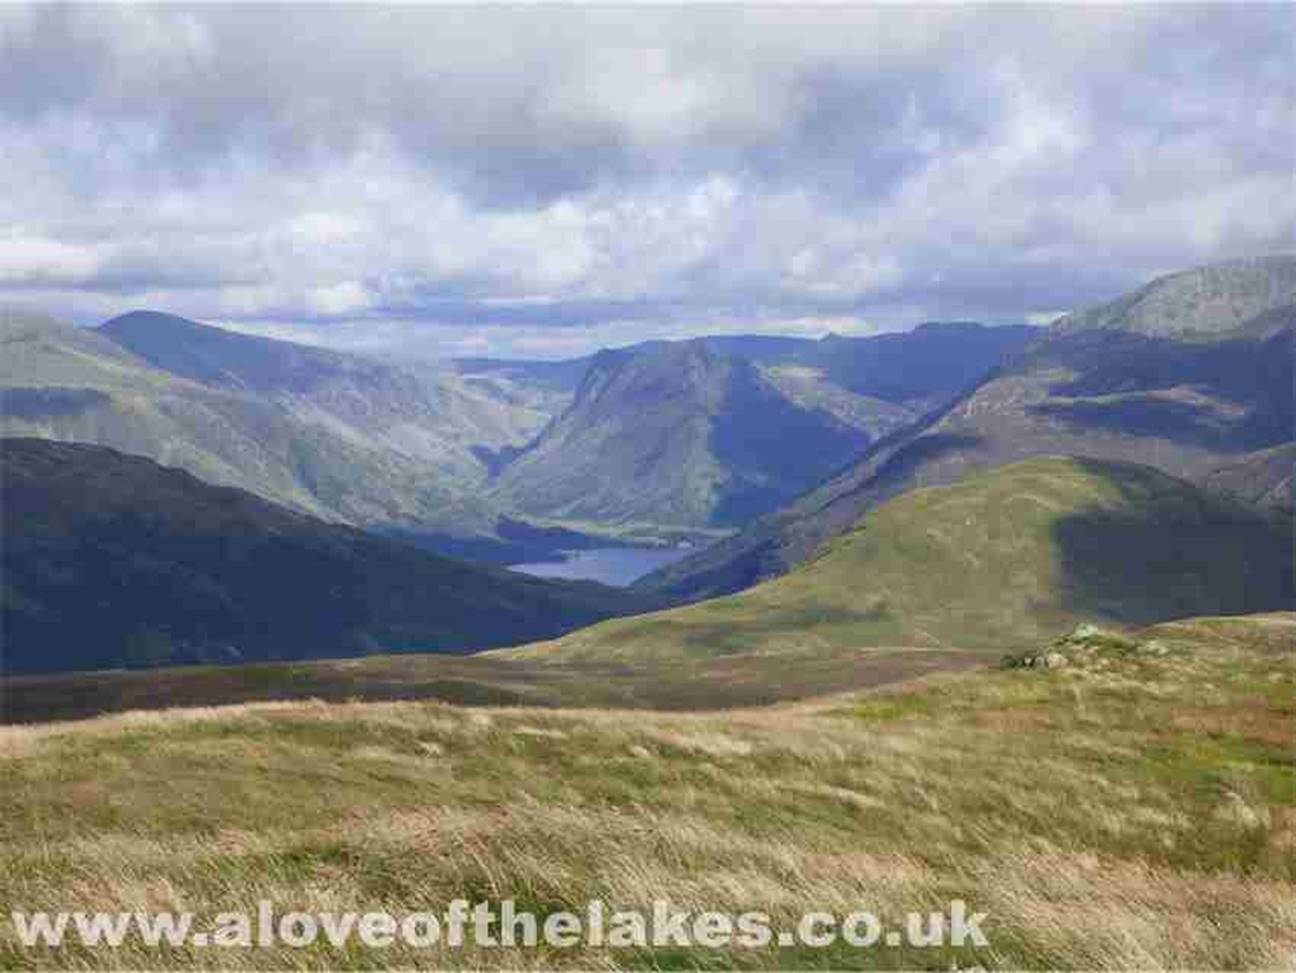 Classic Lakeland scenery  Buttermere with Fleetwith Pike in the centre